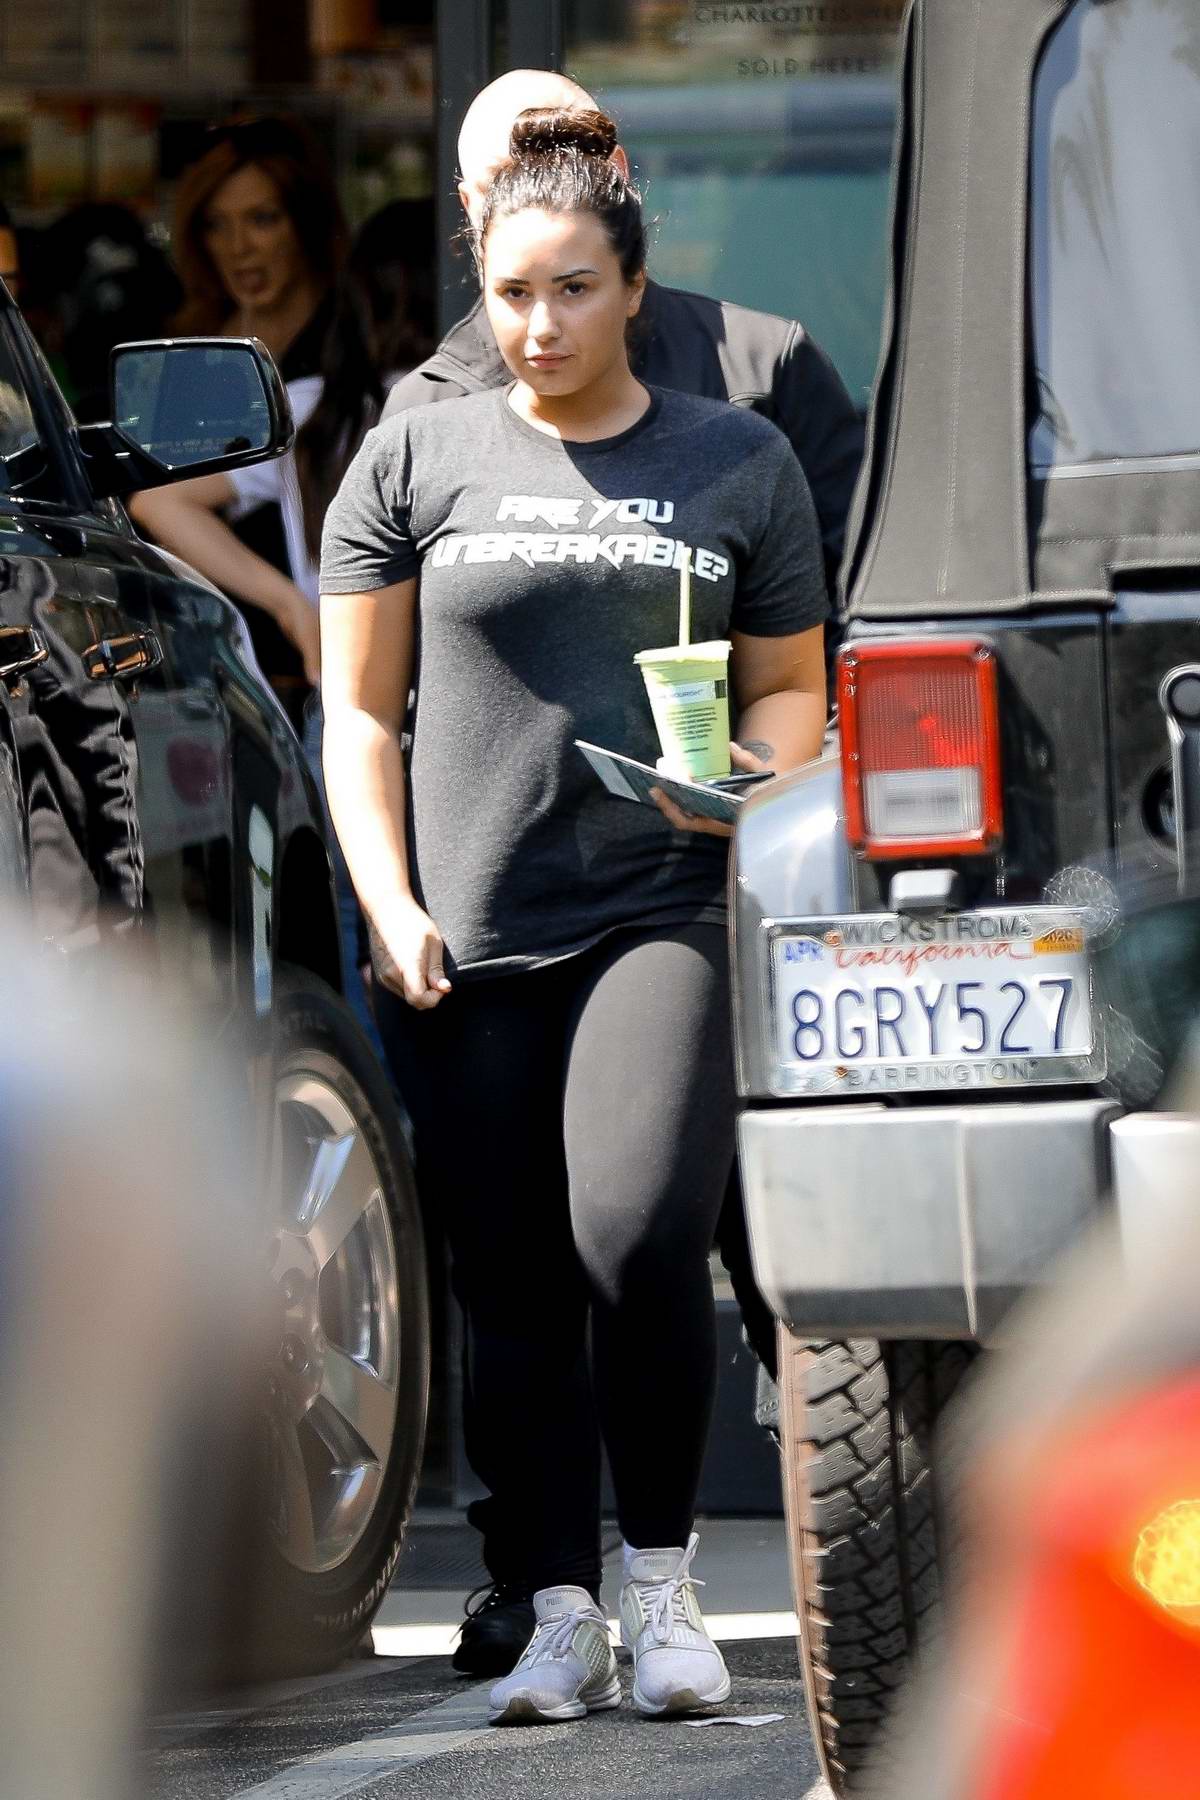 Demi Lovato spotted in a dark grey tee and black leggings as she grabs some  juice